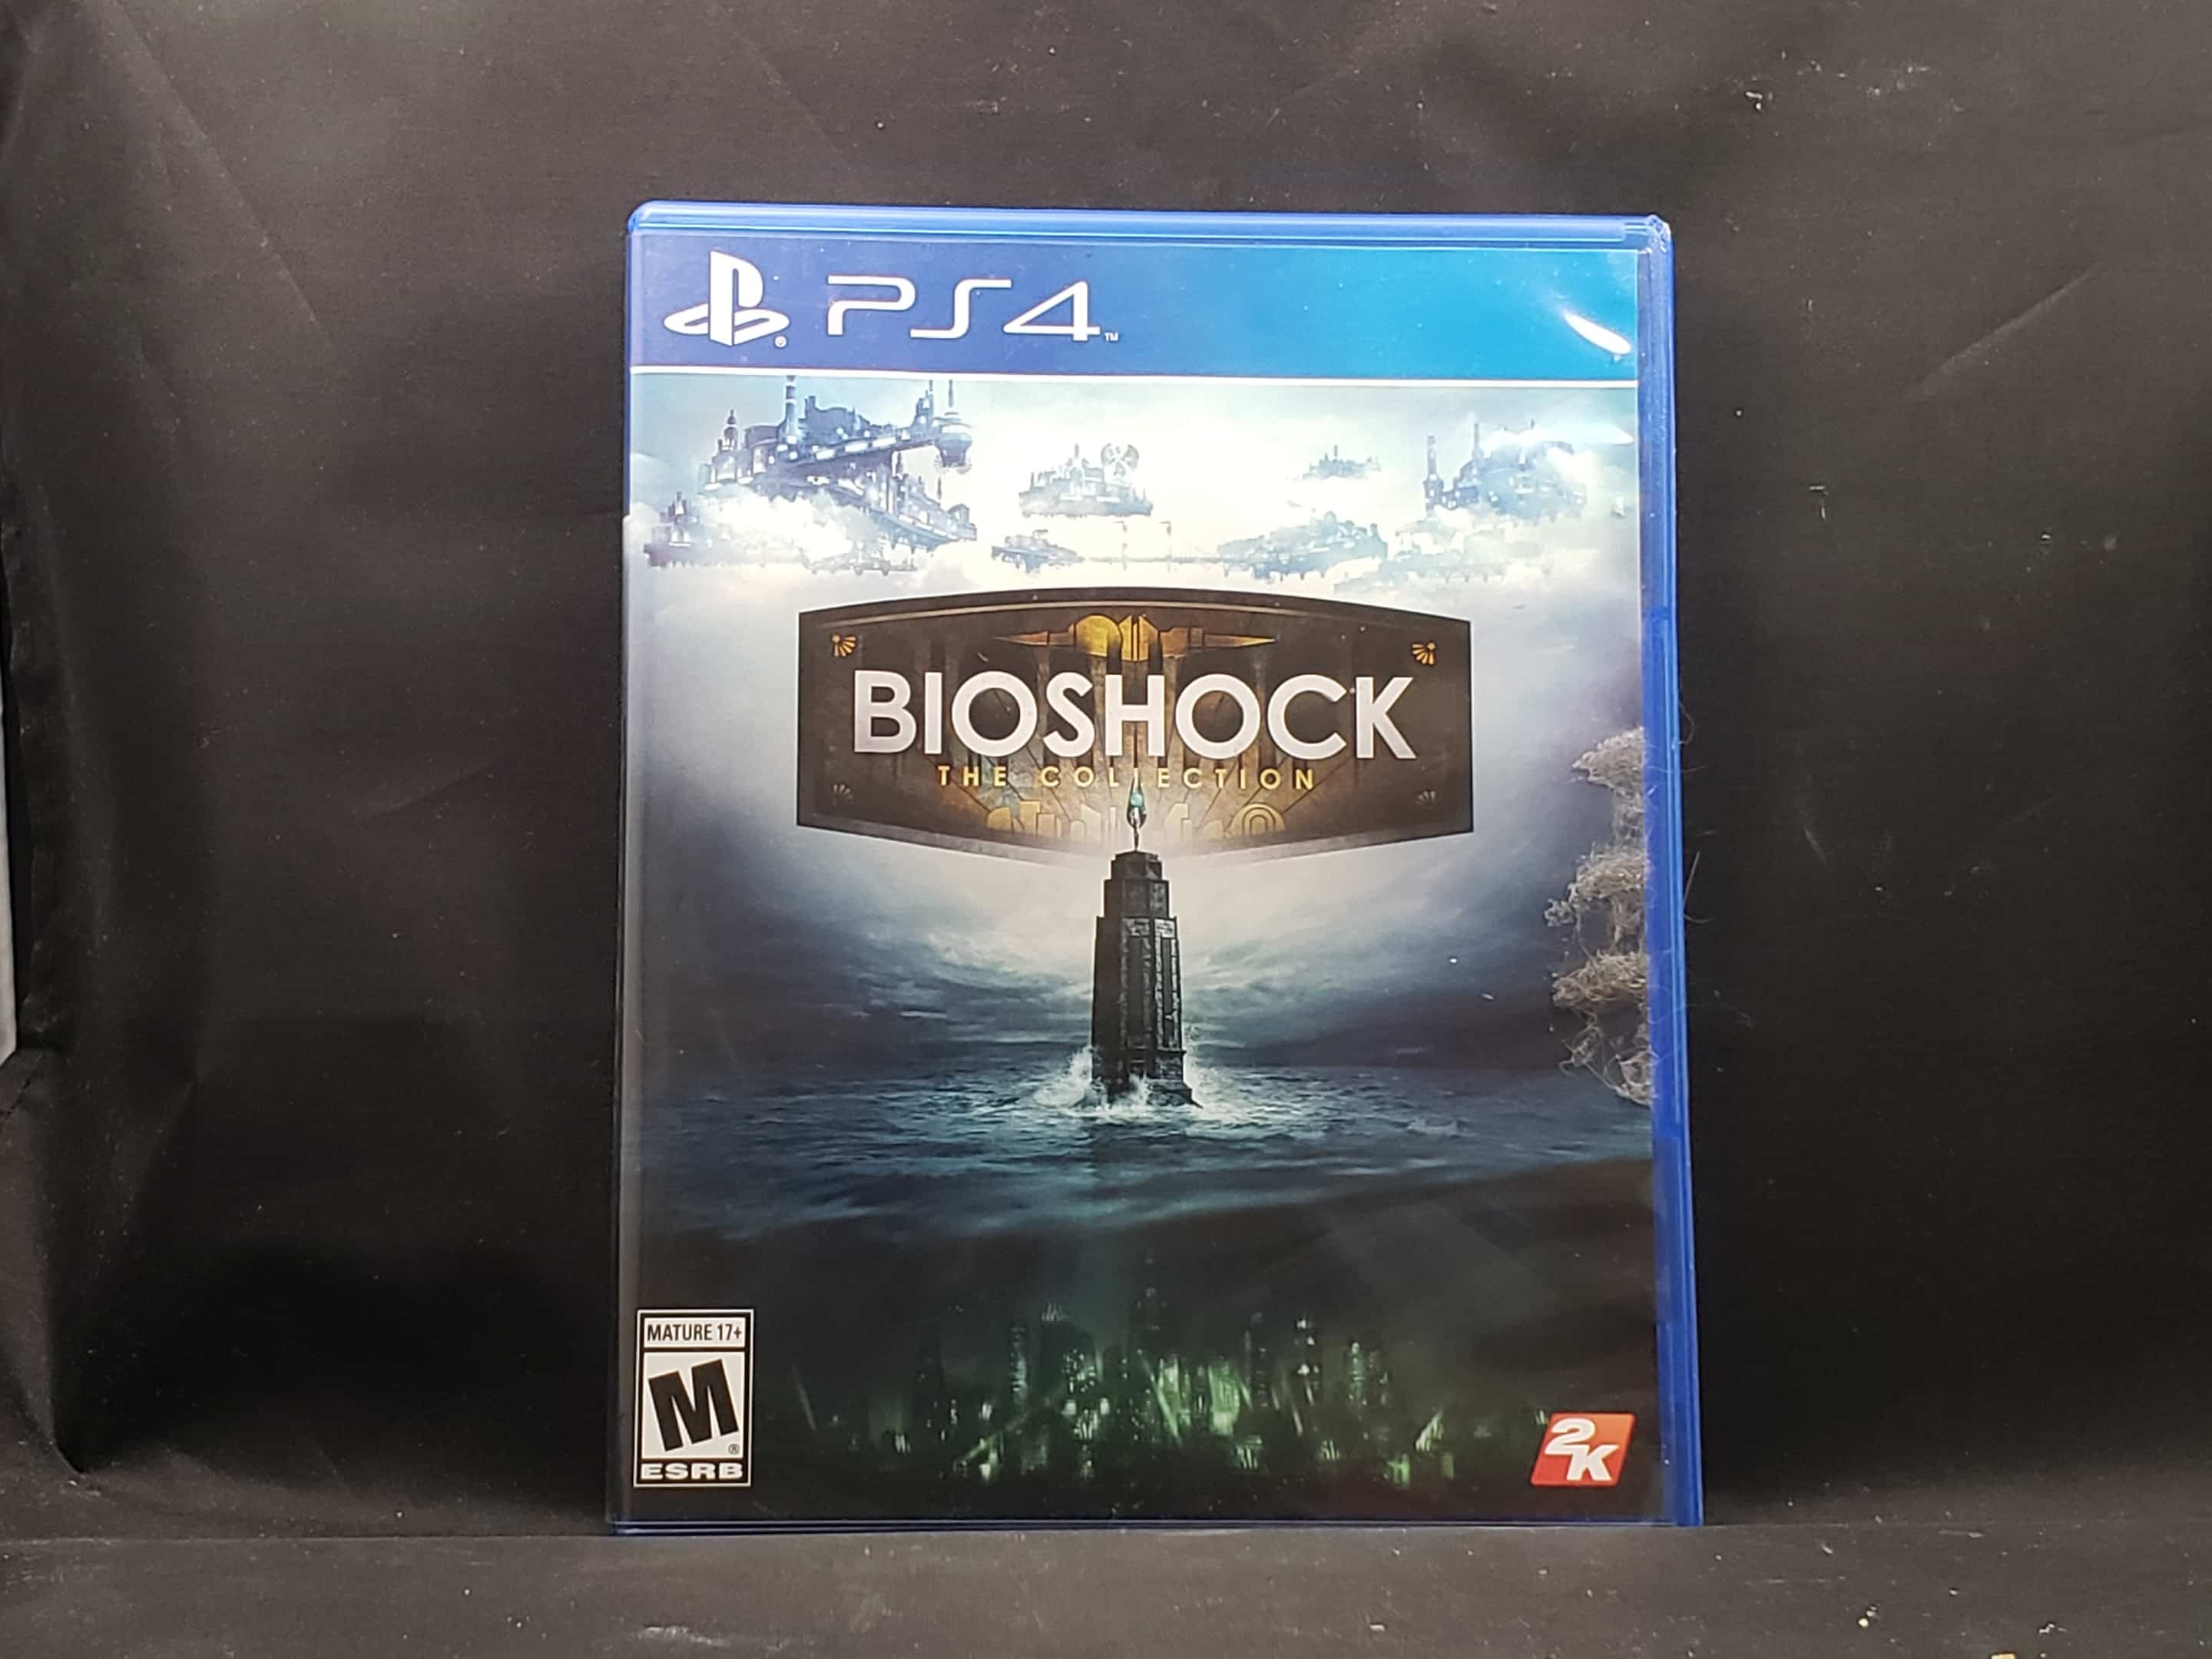 BioShock: The Collection Playstation 4 PS4 Used